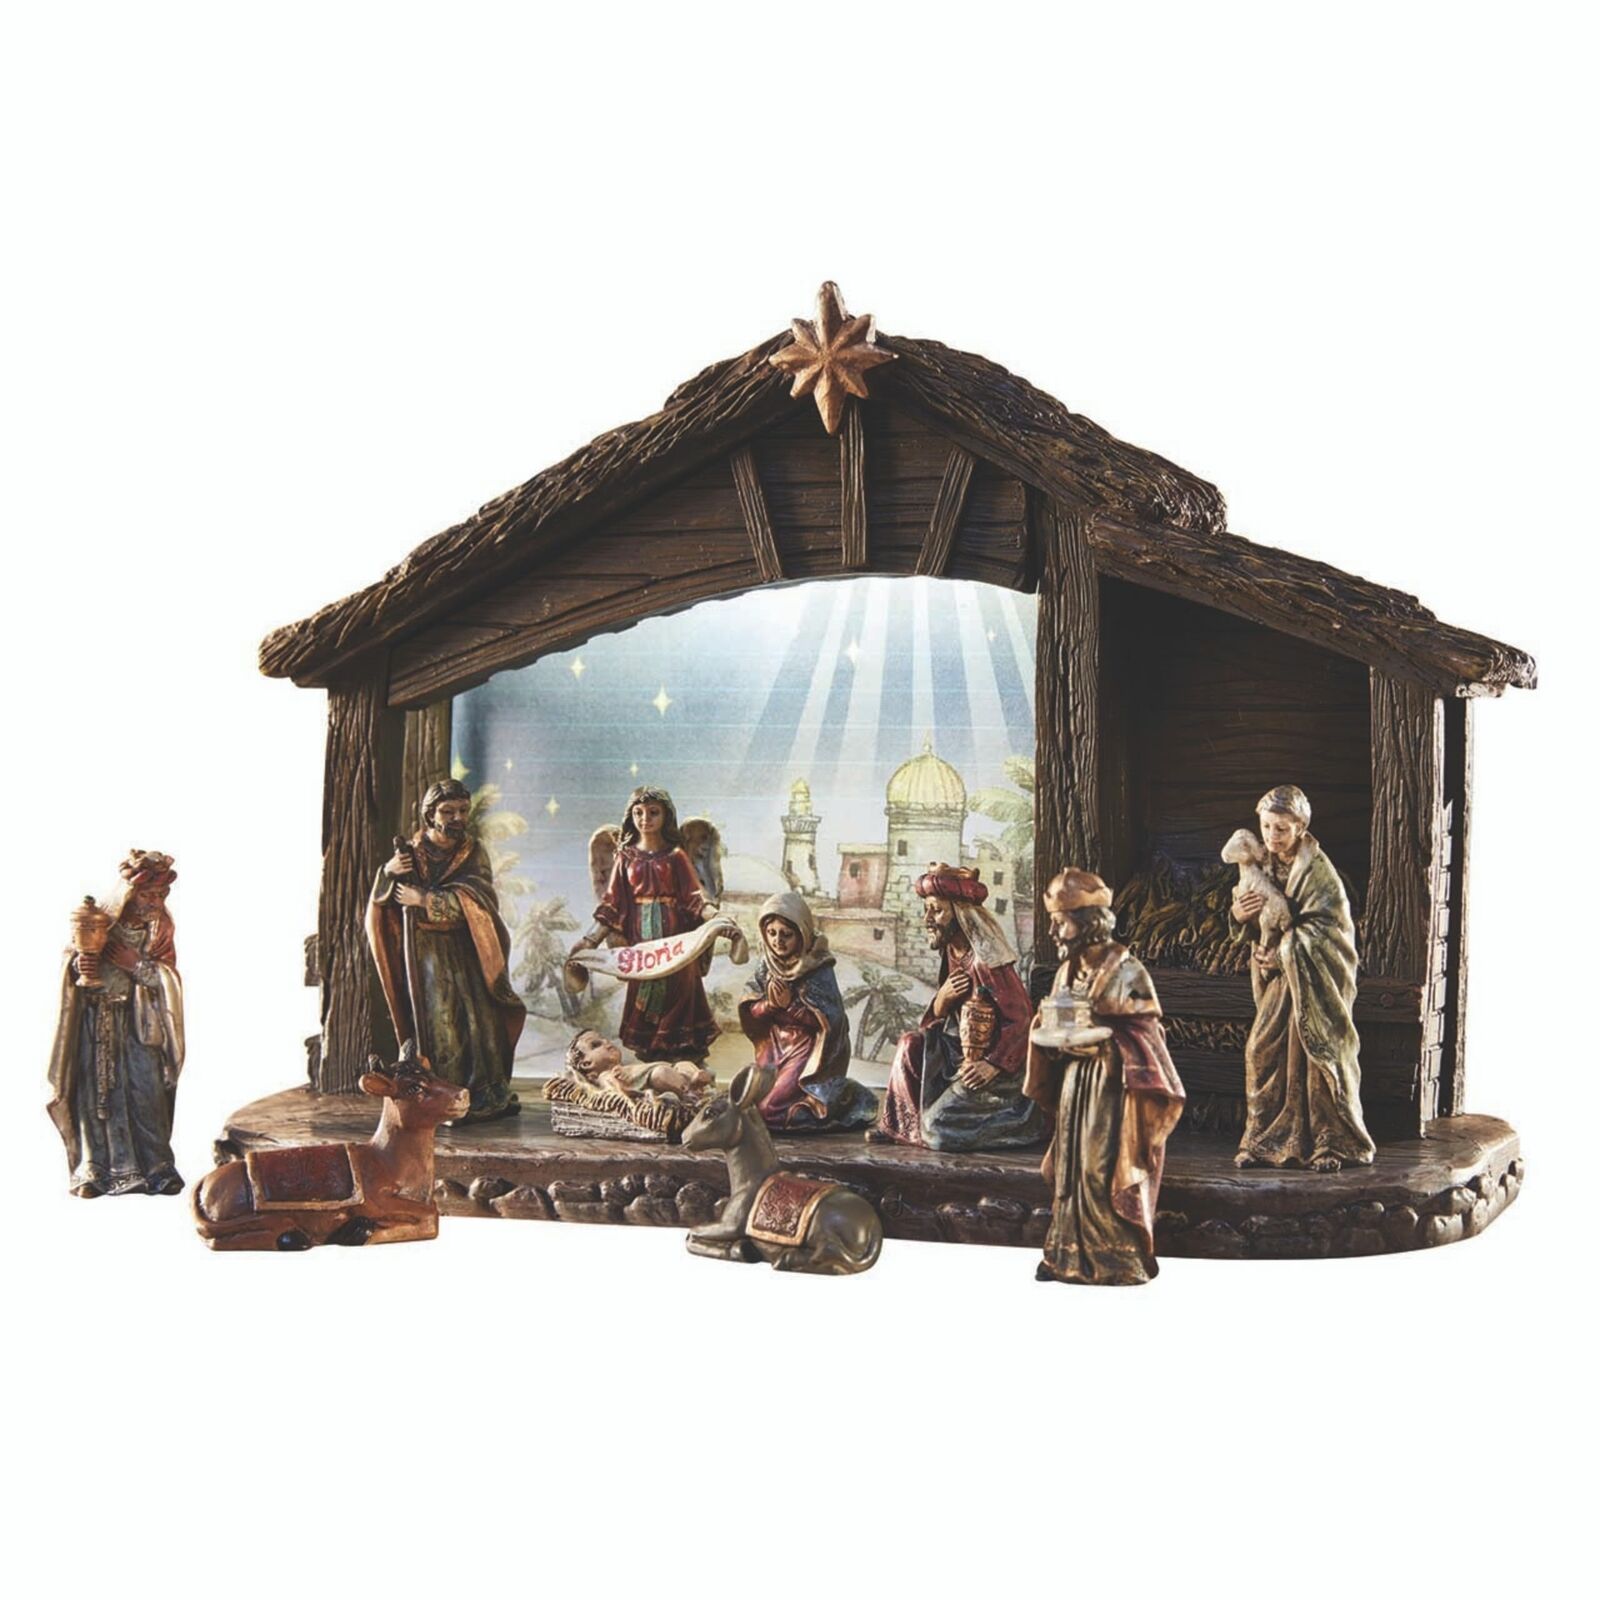 Avalon Gallery Nativity Sets for Christmas - LED Lighted Nativity Scene with ...